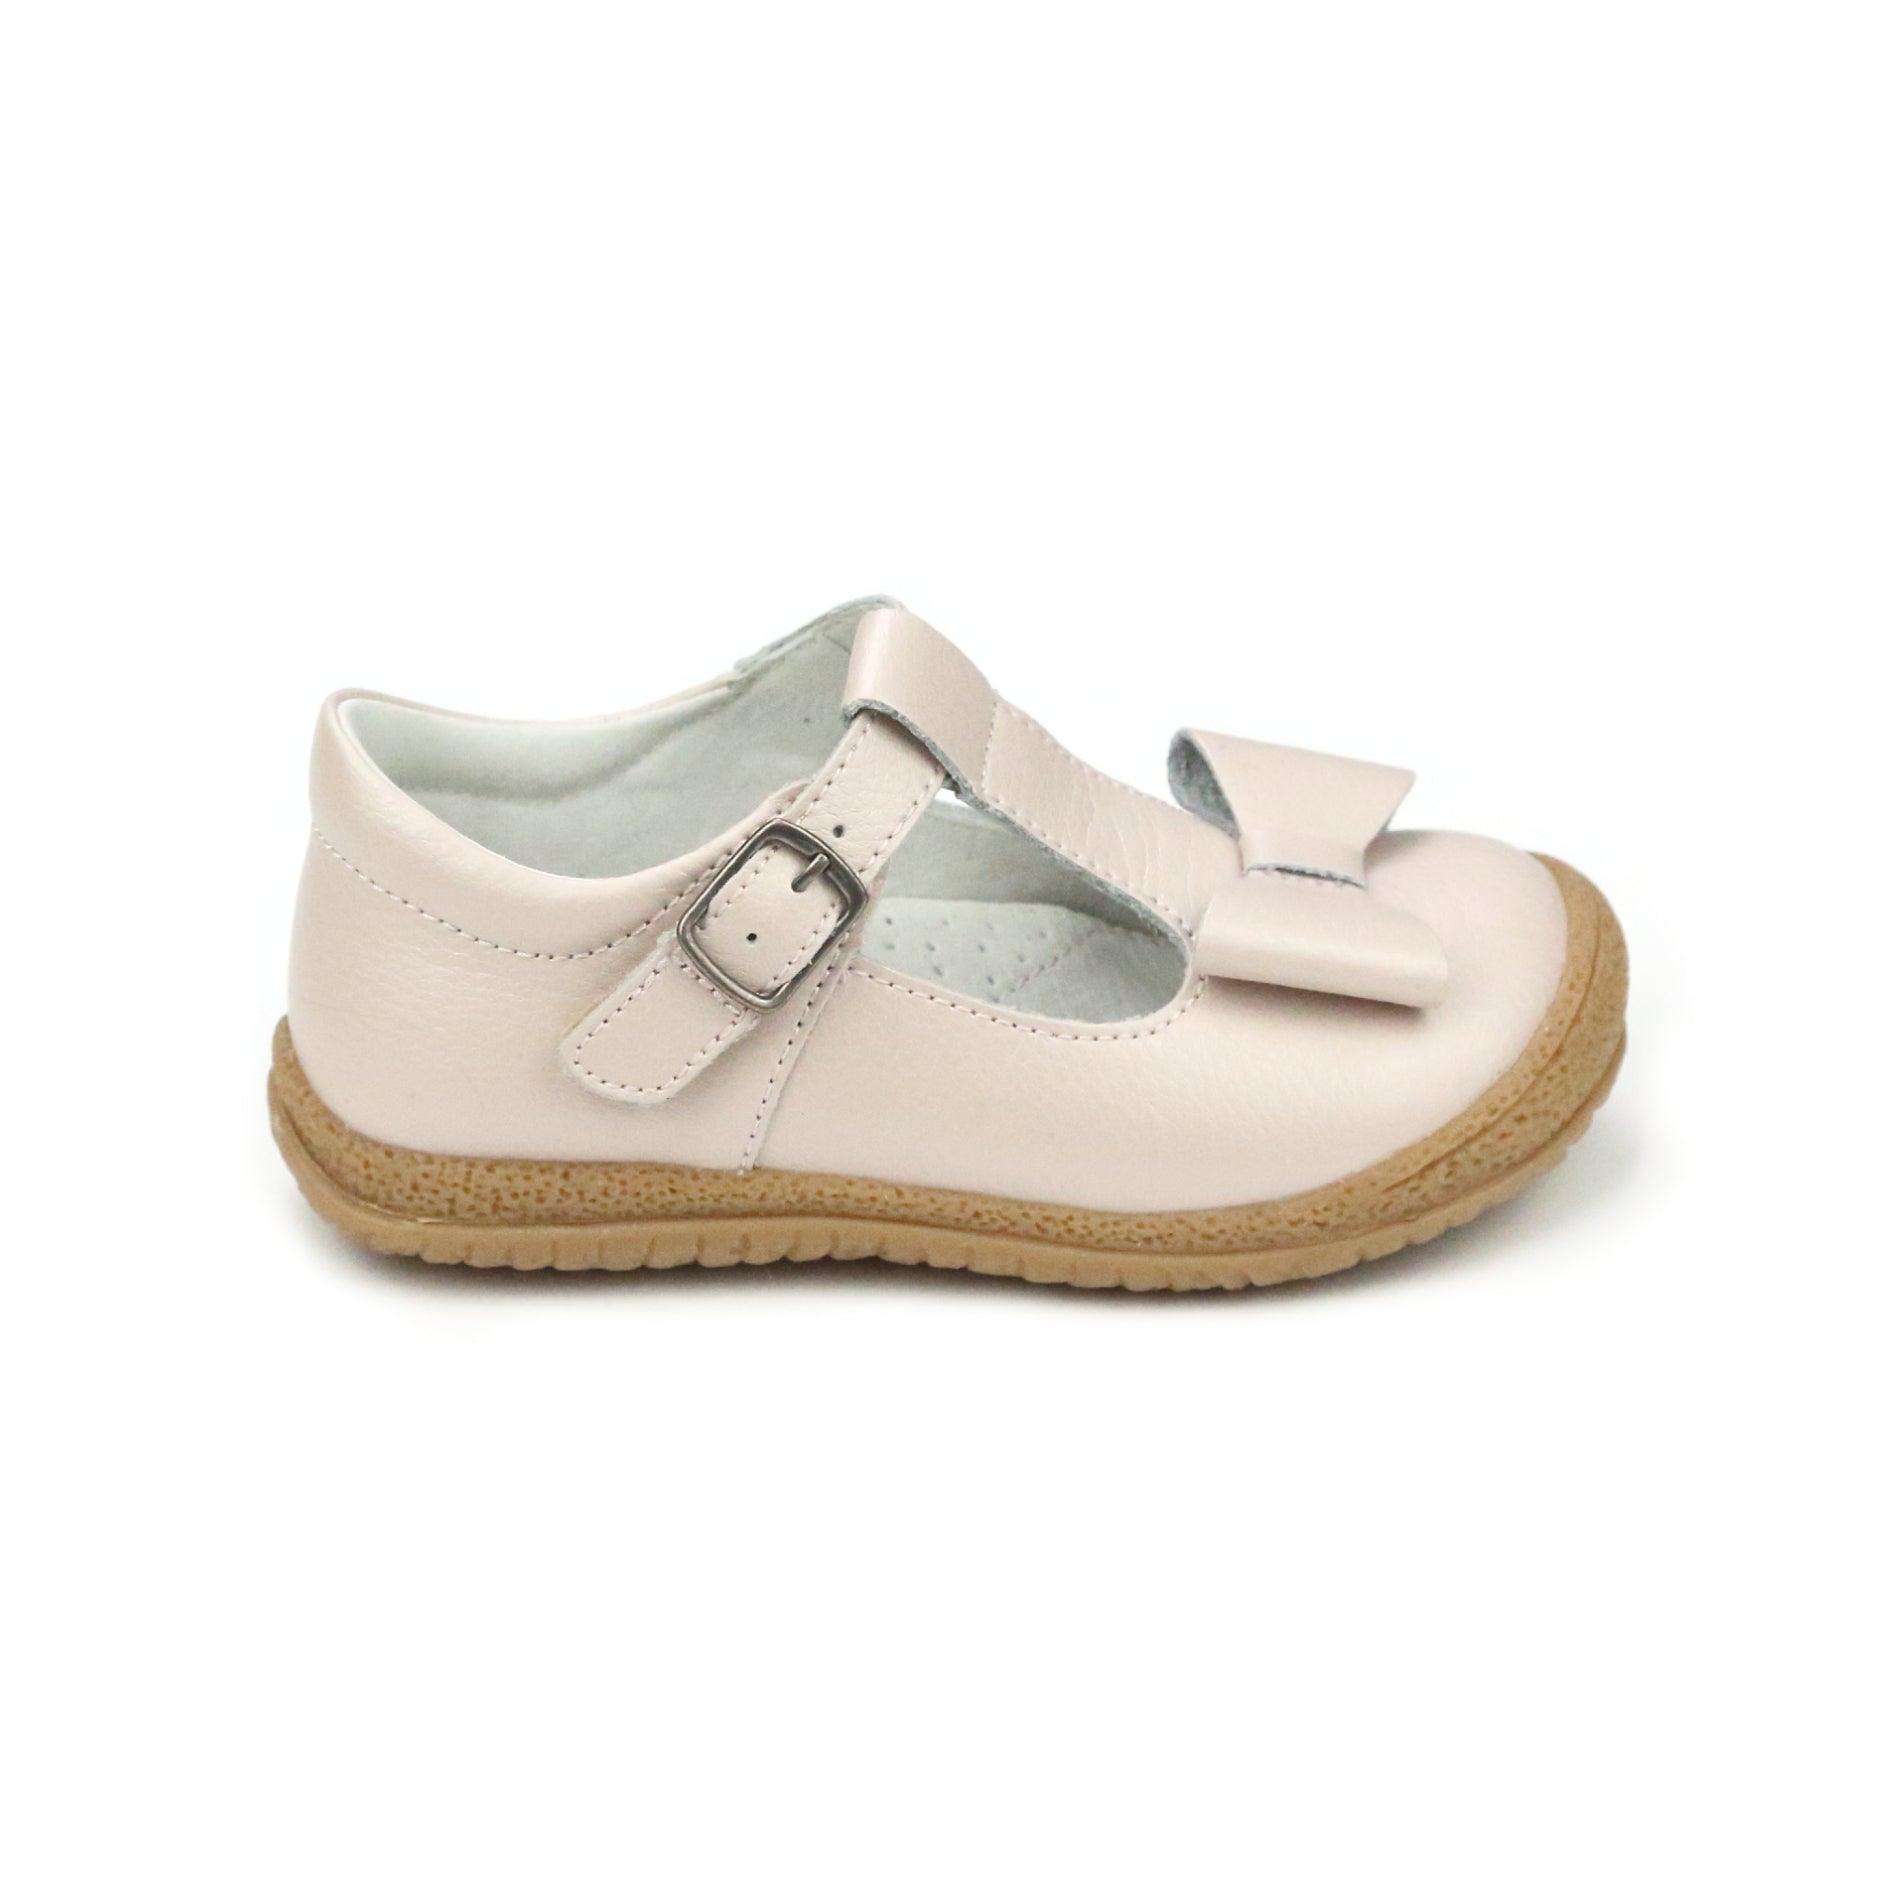 EMMA T-STRAP MARY JANE WITH BOW IN WHITE #21444 – PRETTY LITTLE THINGS AT  NEW-BOS, INC.